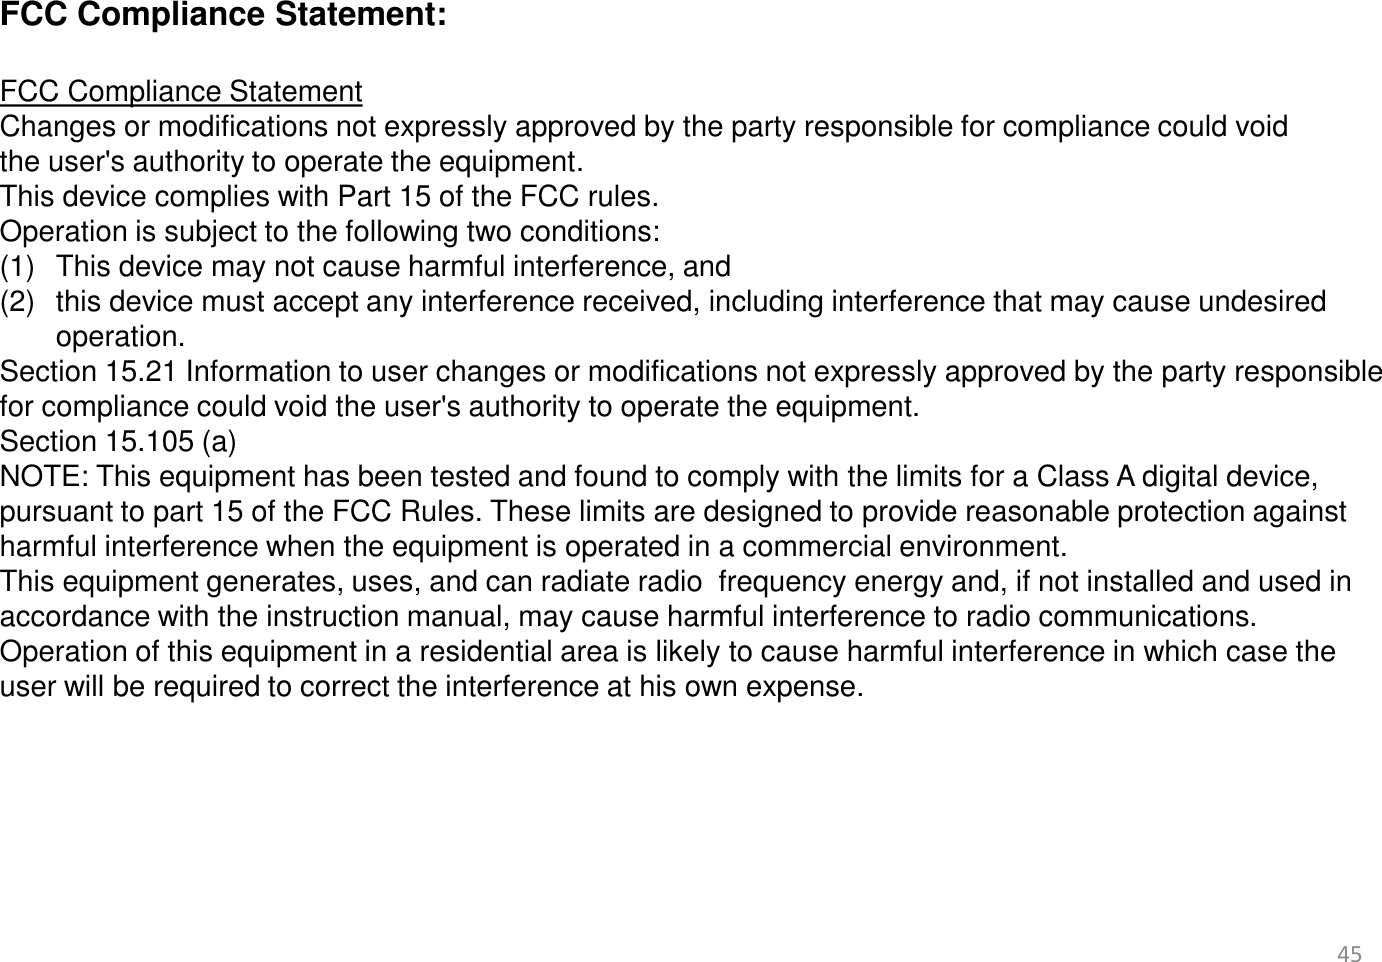 45       FCC Compliance Statement:   FCC Compliance Statement  Changes or modifications not expressly approved by the party responsible for compliance could void the user&apos;s authority to operate the equipment.  This device complies with Part 15 of the FCC rules.  Operation is subject to the following two conditions: (1) This device may not cause harmful interference, and  (2) this device must accept any interference received, including interference that may cause undesired operation.  Section 15.21 Information to user changes or modifications not expressly approved by the party responsible for compliance could void the user&apos;s authority to operate the equipment. Section 15.105 (a)  NOTE: This equipment has been tested and found to comply with the limits for a Class A digital device, pursuant to part 15 of the FCC Rules. These limits are designed to provide reasonable protection against harmful interference when the equipment is operated in a commercial environment.  This equipment generates, uses, and can radiate radio  frequency energy and, if not installed and used in accordance with the instruction manual, may cause harmful interference to radio communications.  Operation of this equipment in a residential area is likely to cause harmful interference in which case the user will be required to correct the interference at his own expense.     